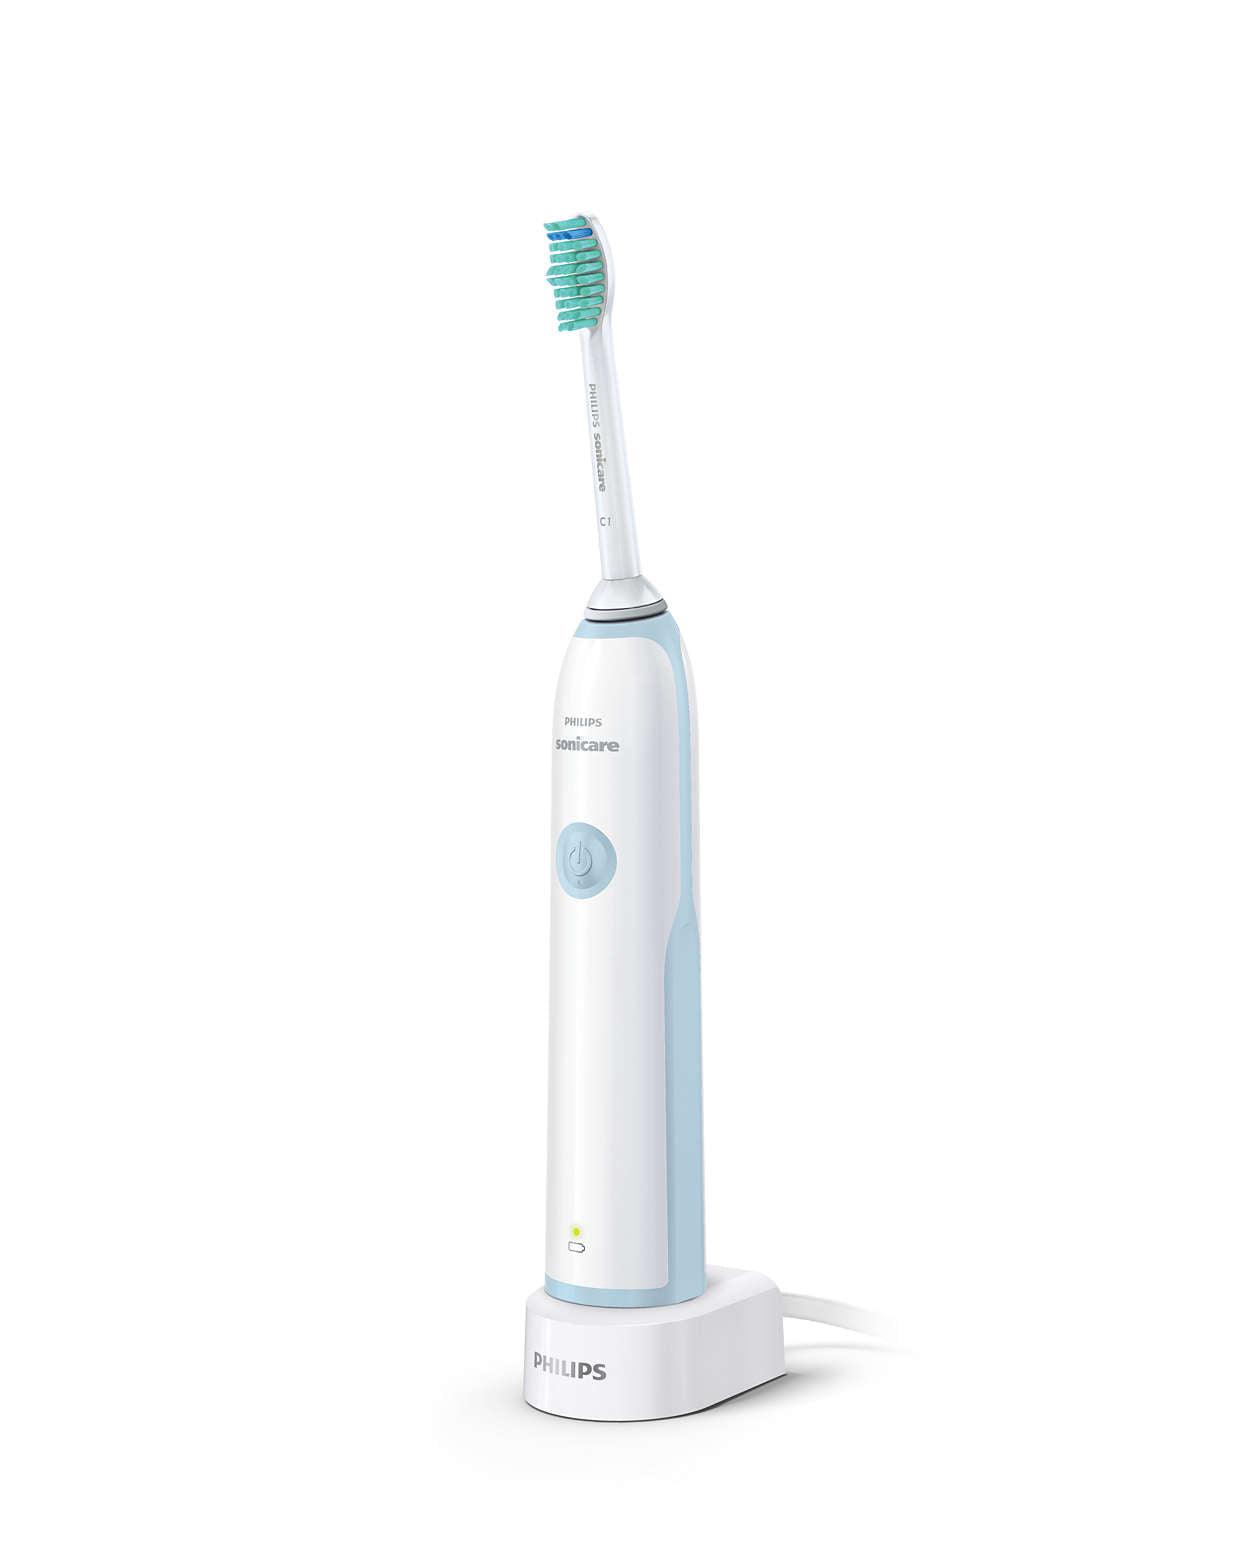 Philips CleanCare+ Toothbrush